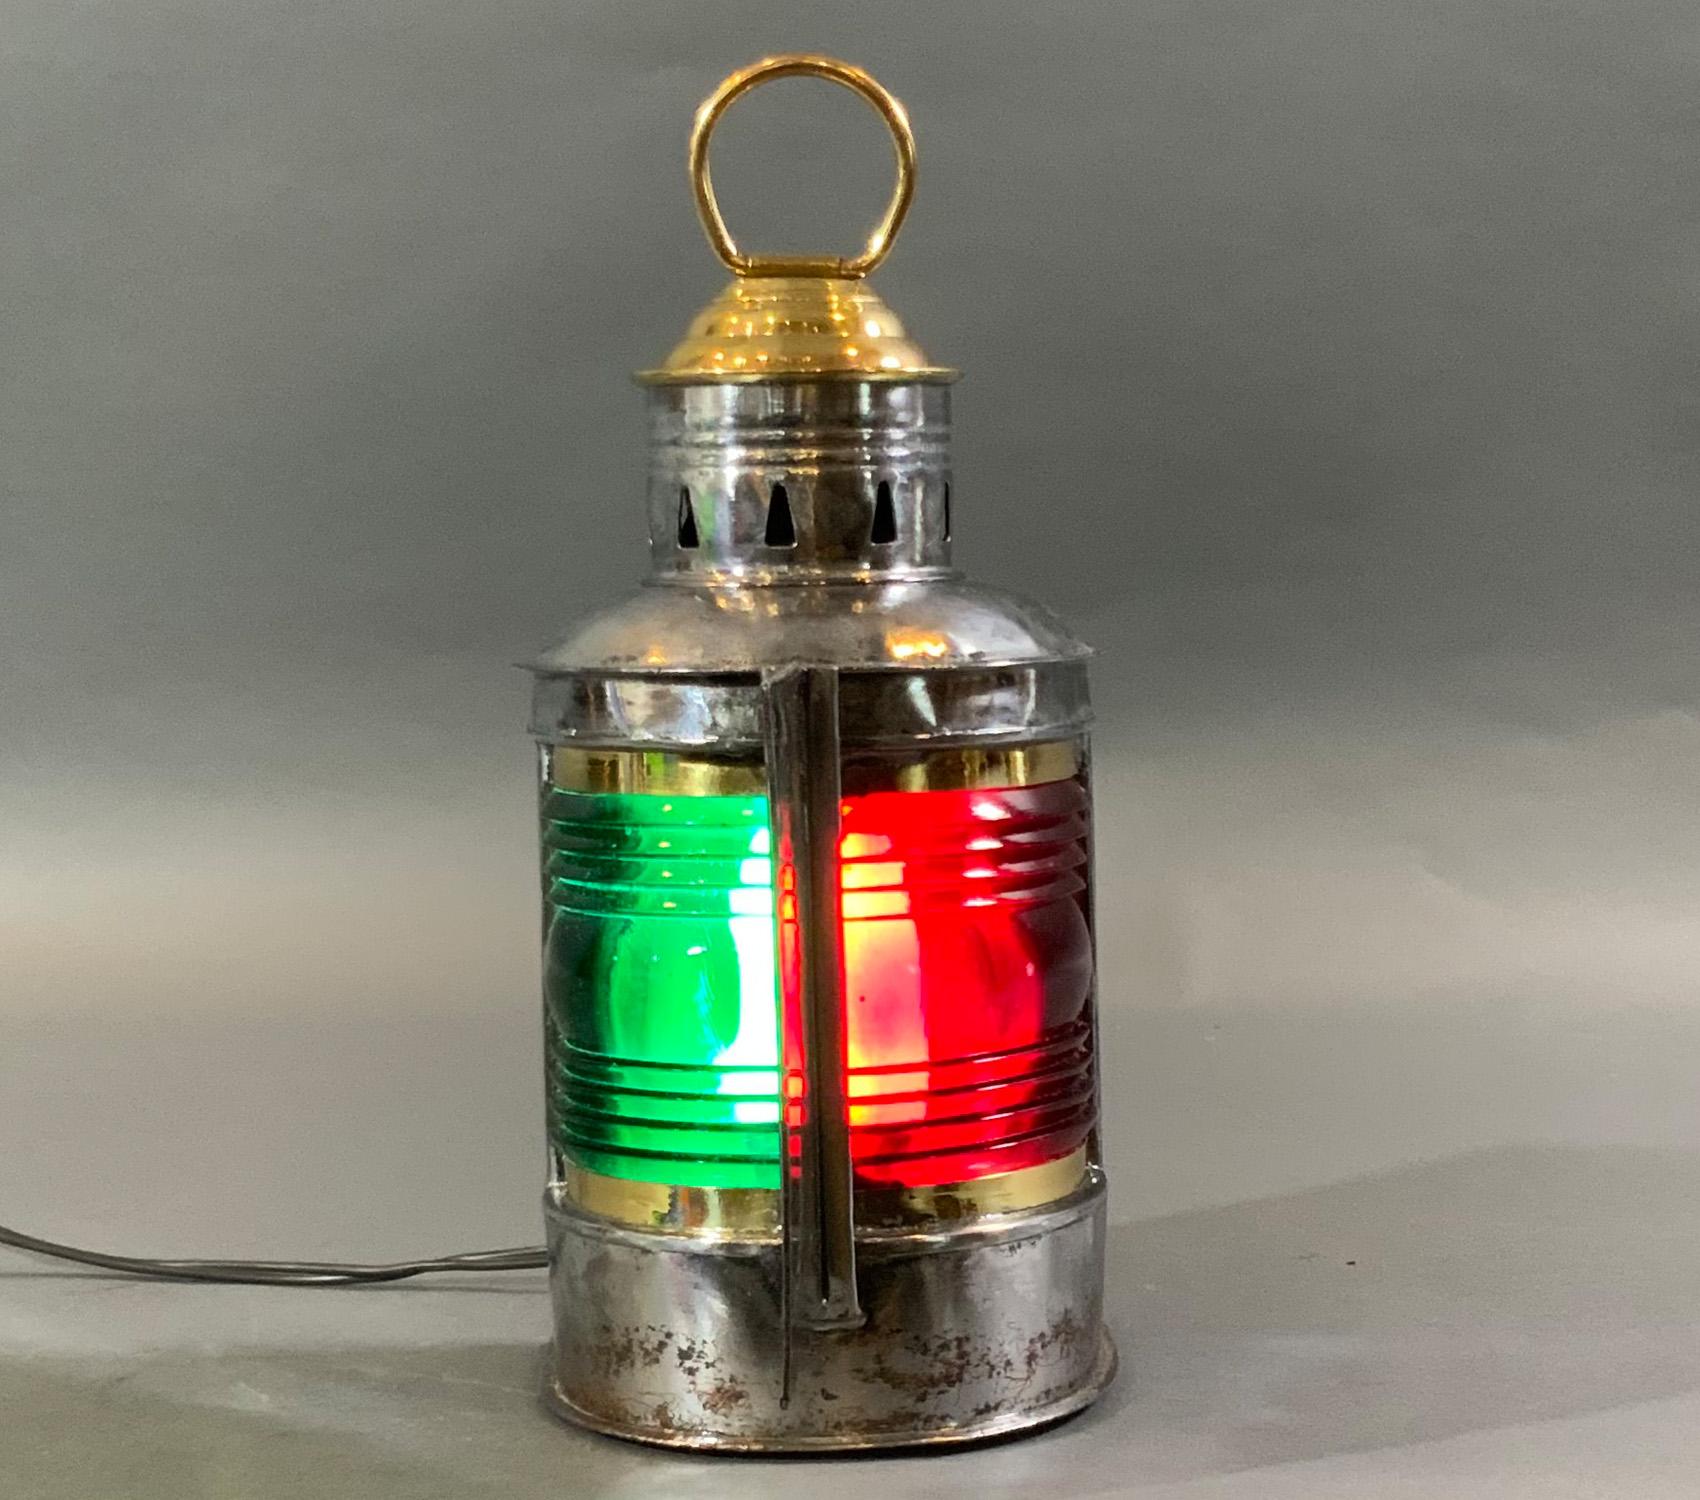 Polished steel bow lantern from a boat. Fitted with red and green Fresnel lenses. Brass cap with hoisting ring. Some staining on metal. With Wilcox Crittenden label fitted with socket and wired for home use.

Weight: 3 LBS
Overall dimensions: 10”